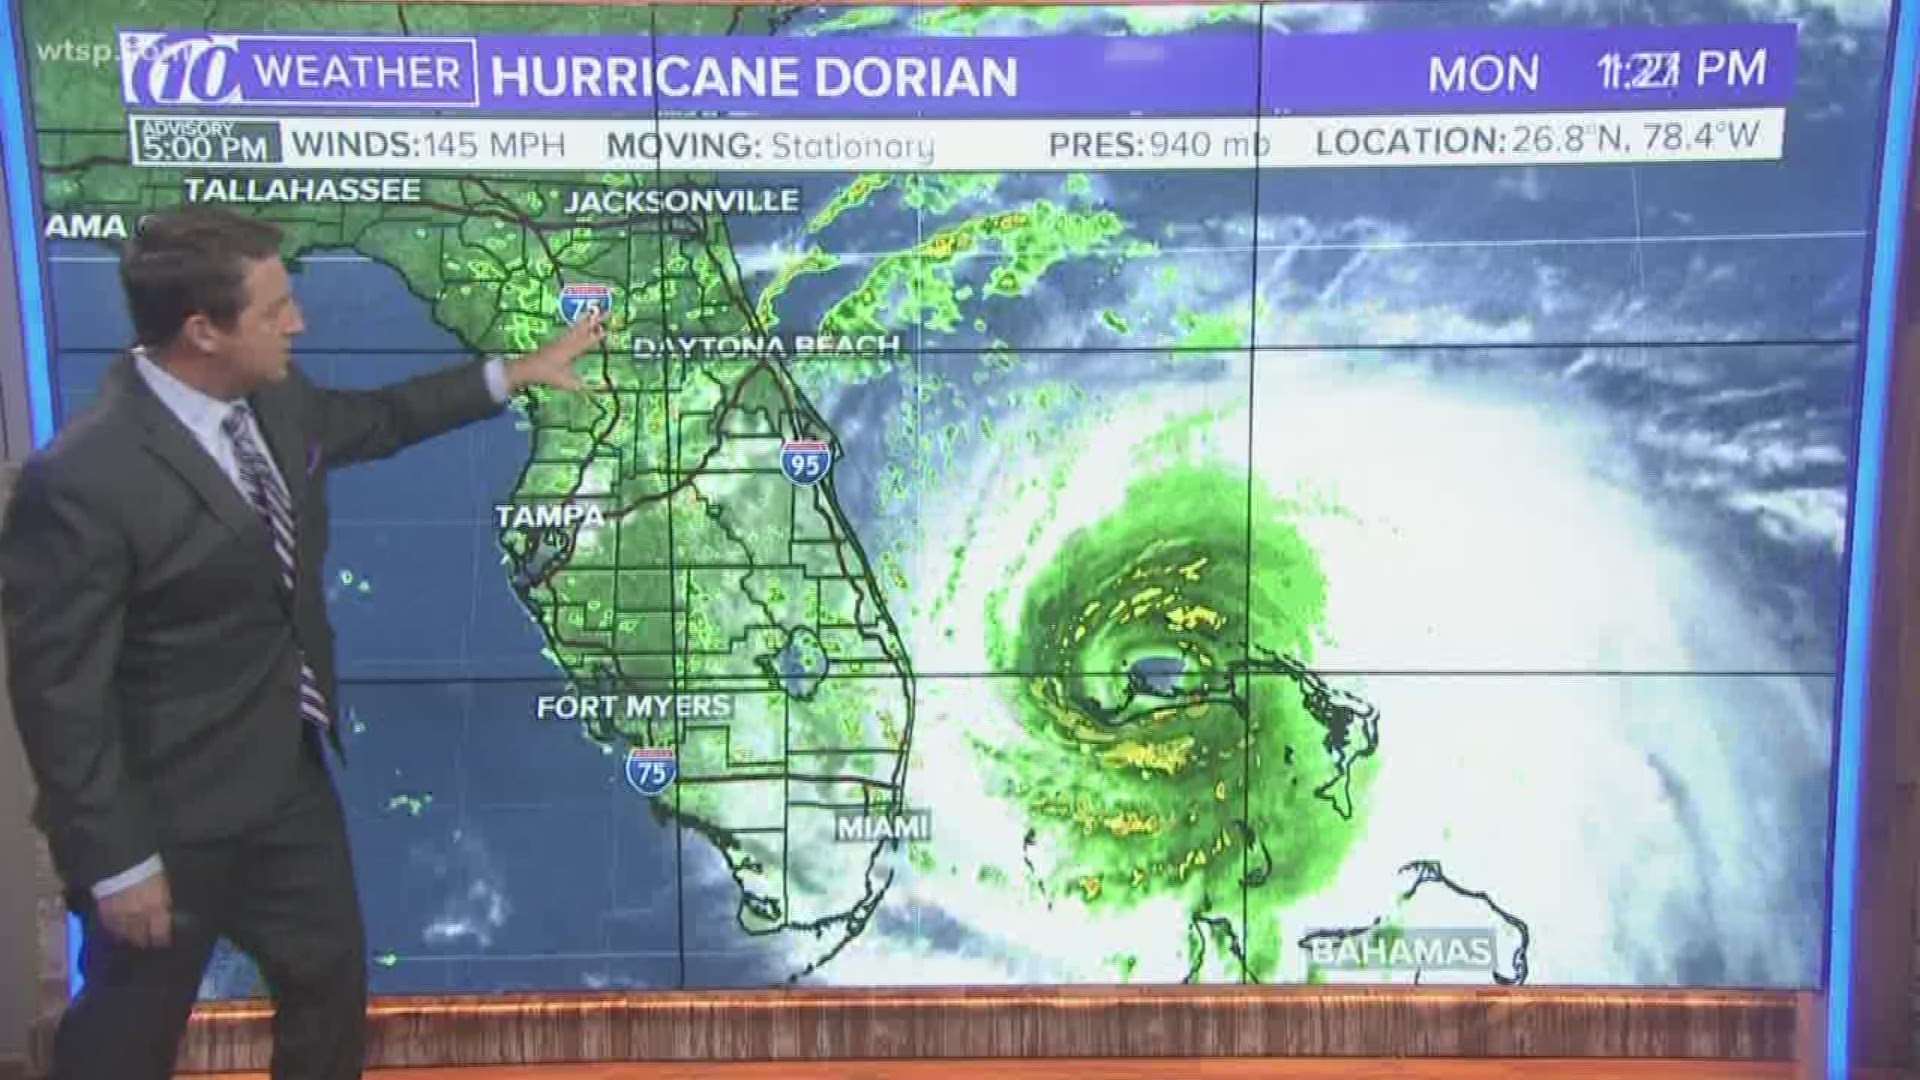 Hurricane Dorian is stationary as it continues to devastate the Bahamas.

The Category 4 hurricane is about 25 miles northeast of Freeport and roughly 105 miles east of West Palm Beach, Florida, according to the National Hurricane Center's latest advisory.

The storm is producing maximum sustained winds up to 145 mph, with Juno Beach, Florida, reporting a sustained tropical-storm-force gust as a result of Dorian being nearby.